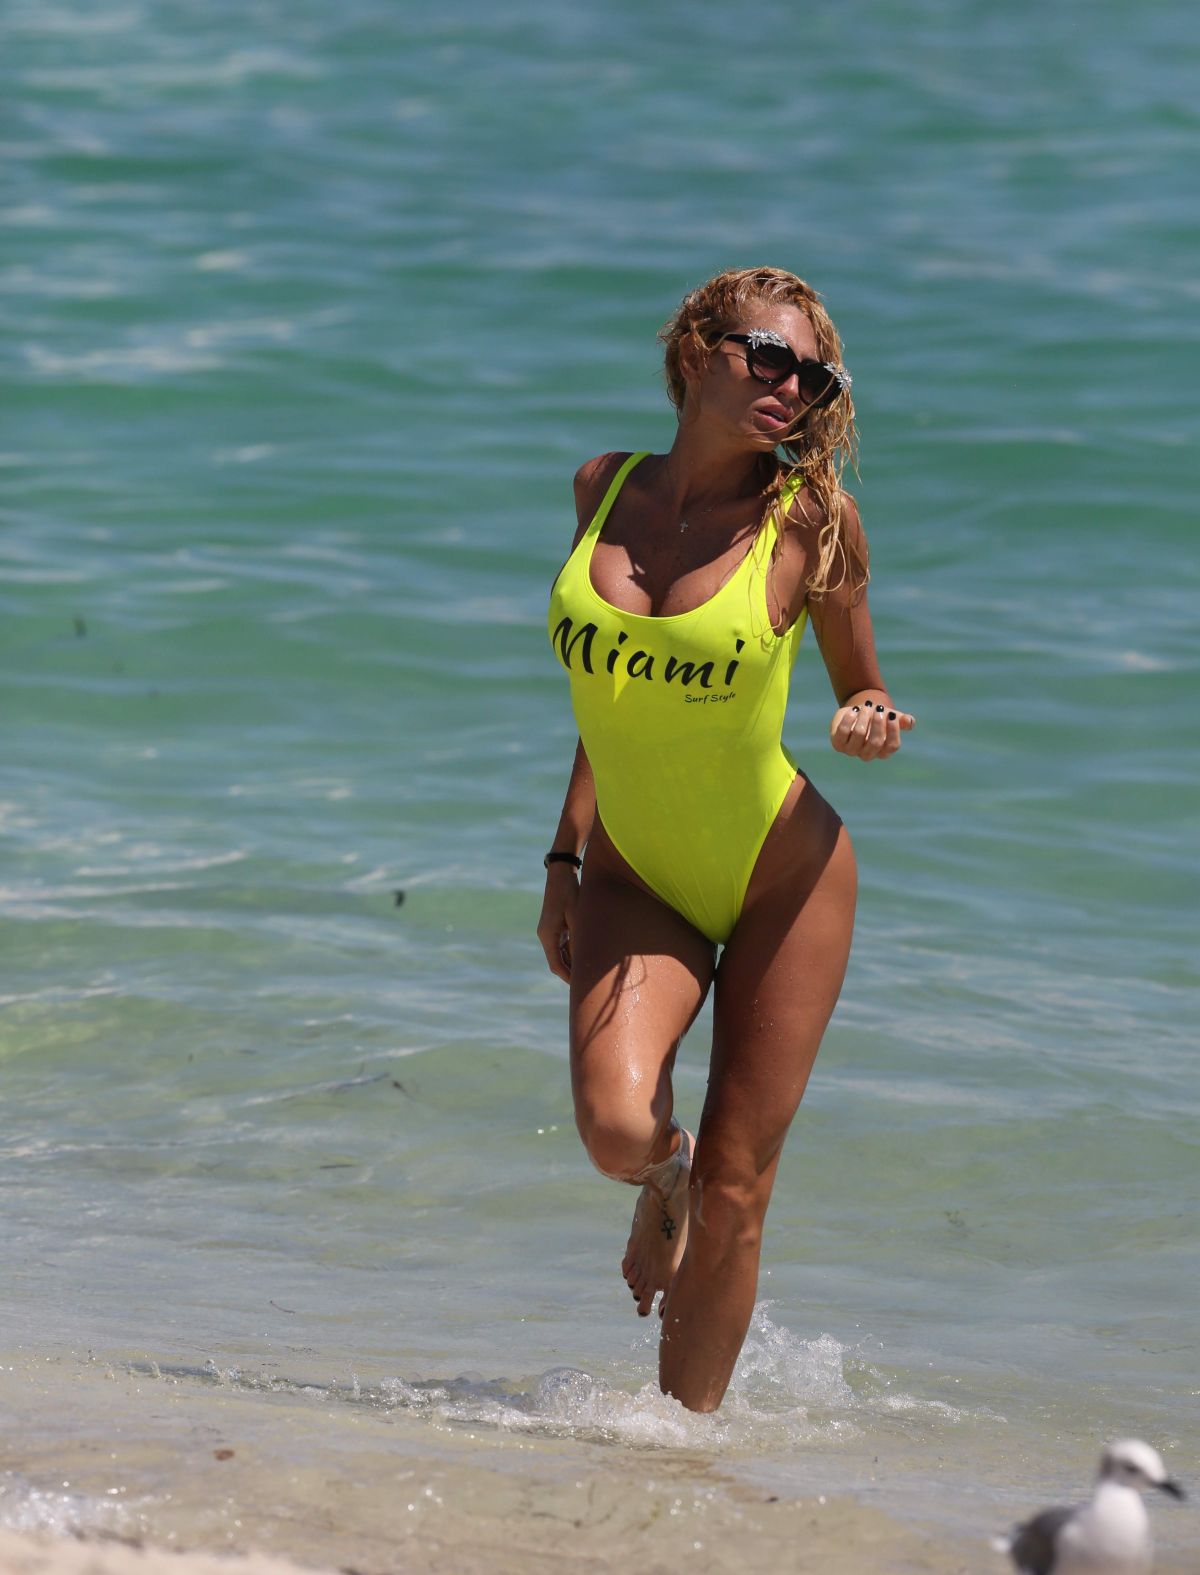 vicky-zipolitakis-in-yellow-swimsuit-at-a-beach-in-miami-09-21-2016_15.jpg